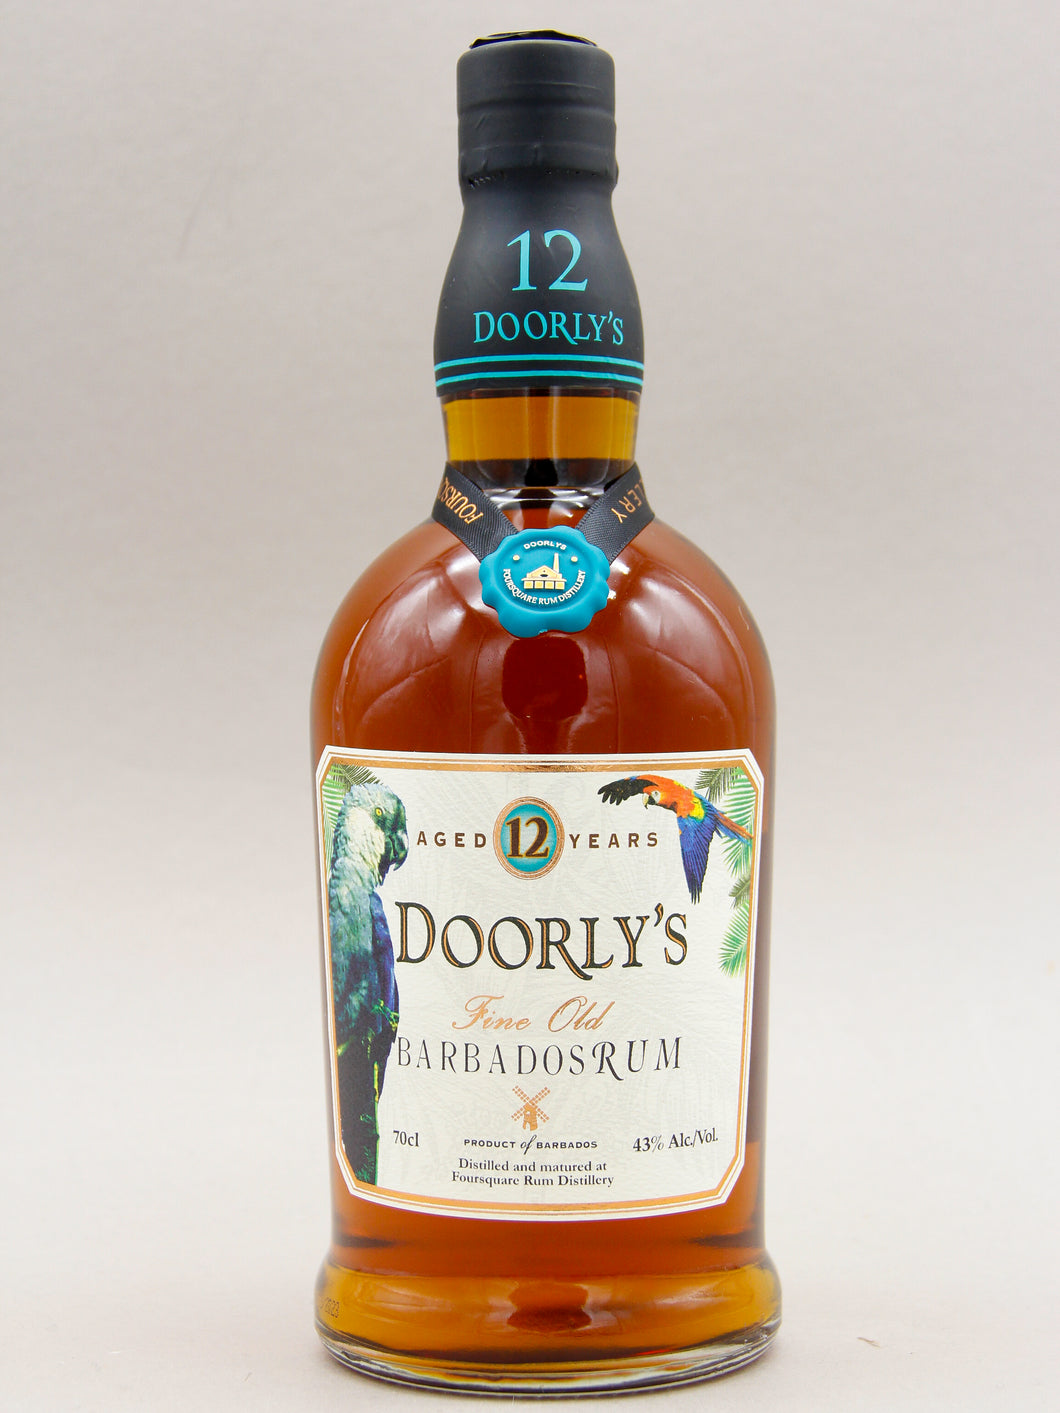 Doorly's 12 Years Old, Fine Old Barbados Rum (43%, 70cl)